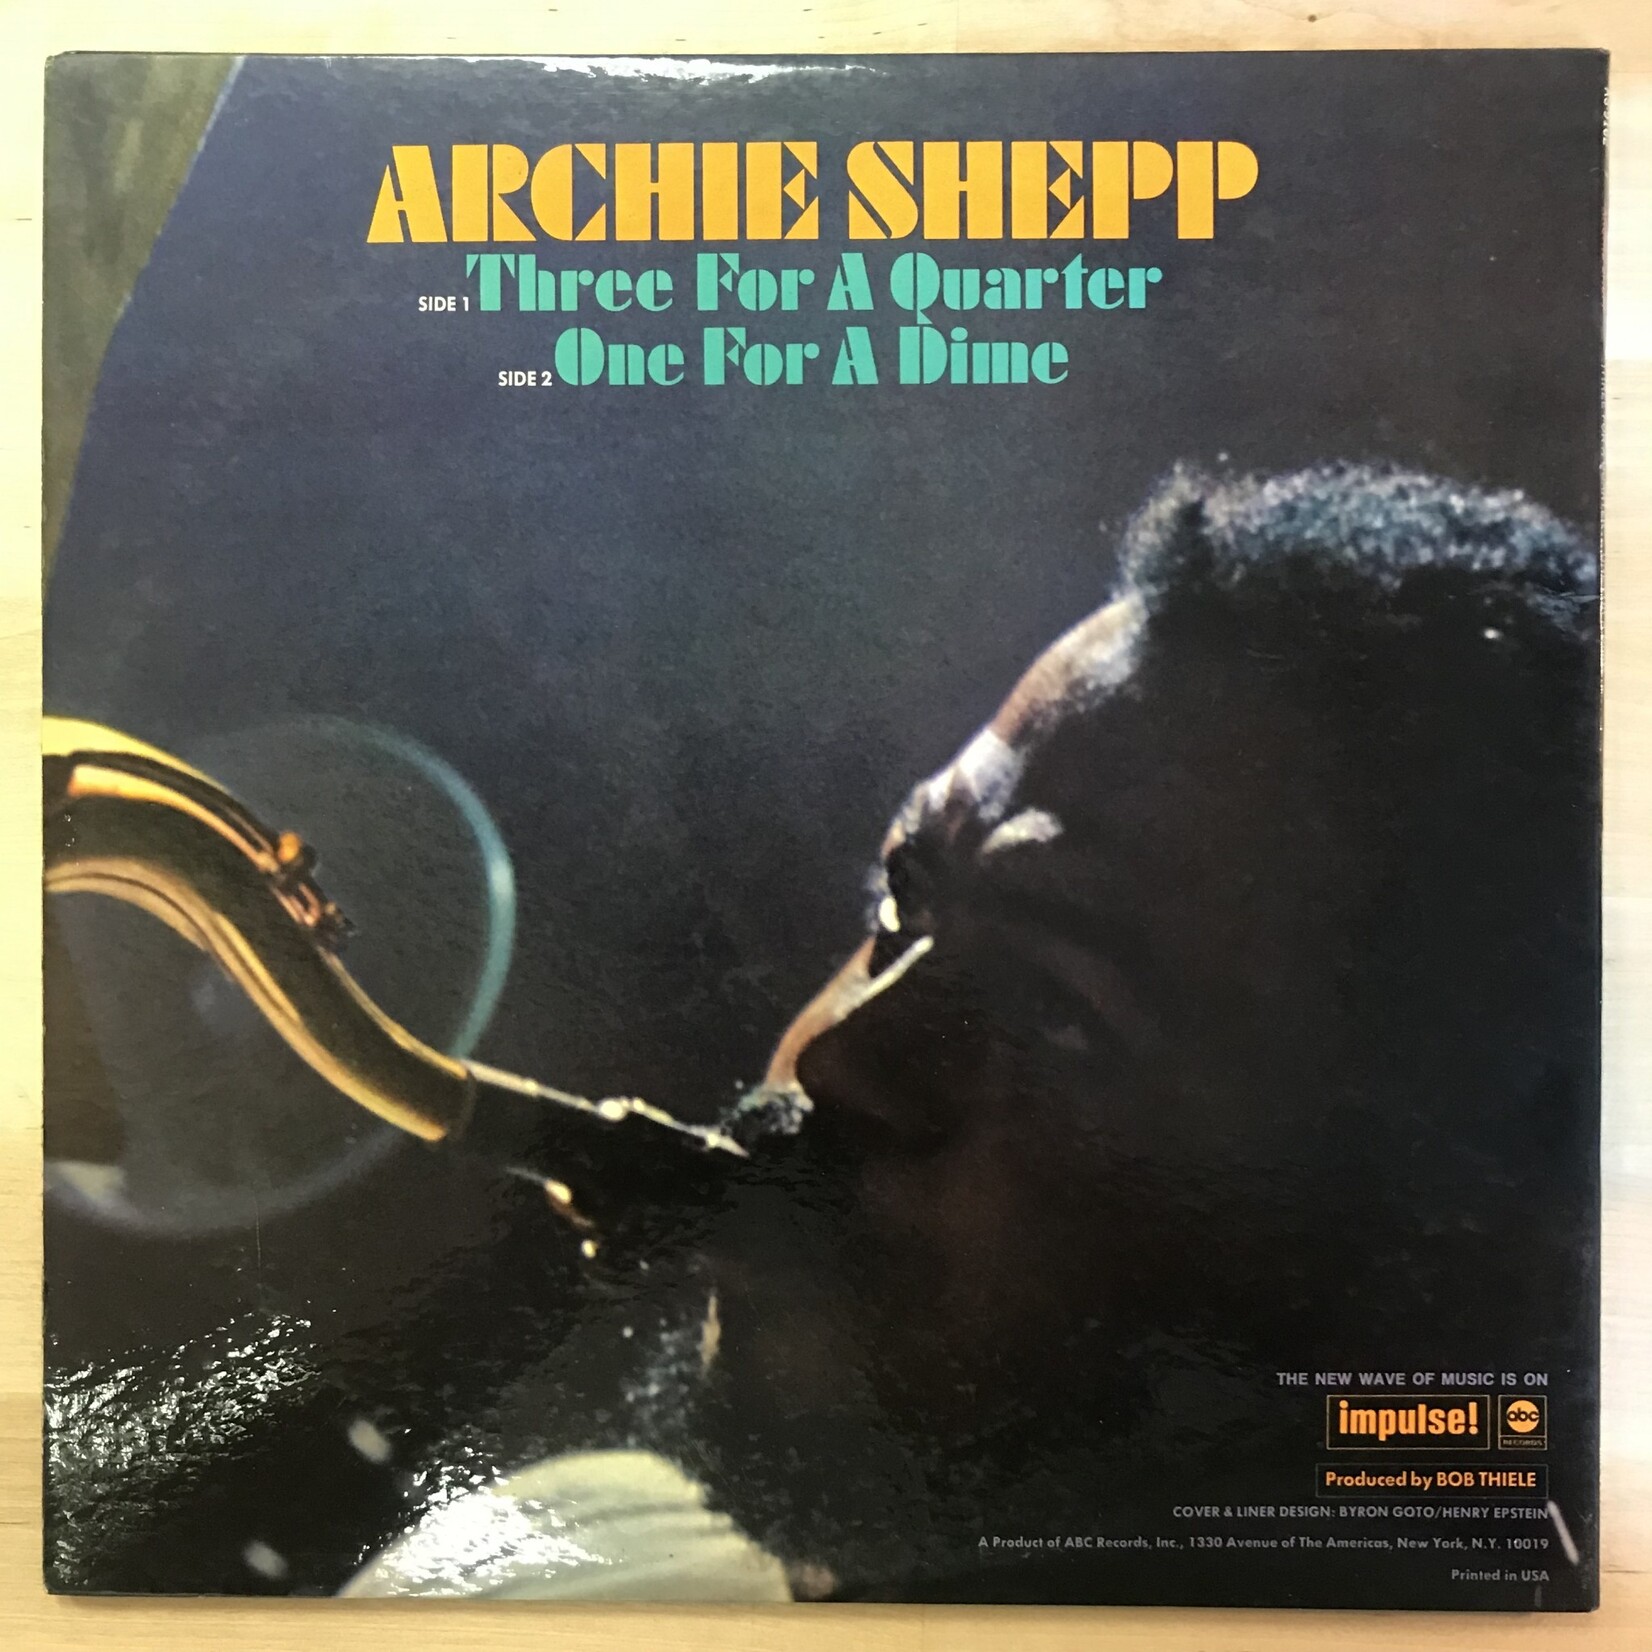 Archie Shepp - Three For A Quarter One For A Dime - AS9162 - Vinyl LP (USED)